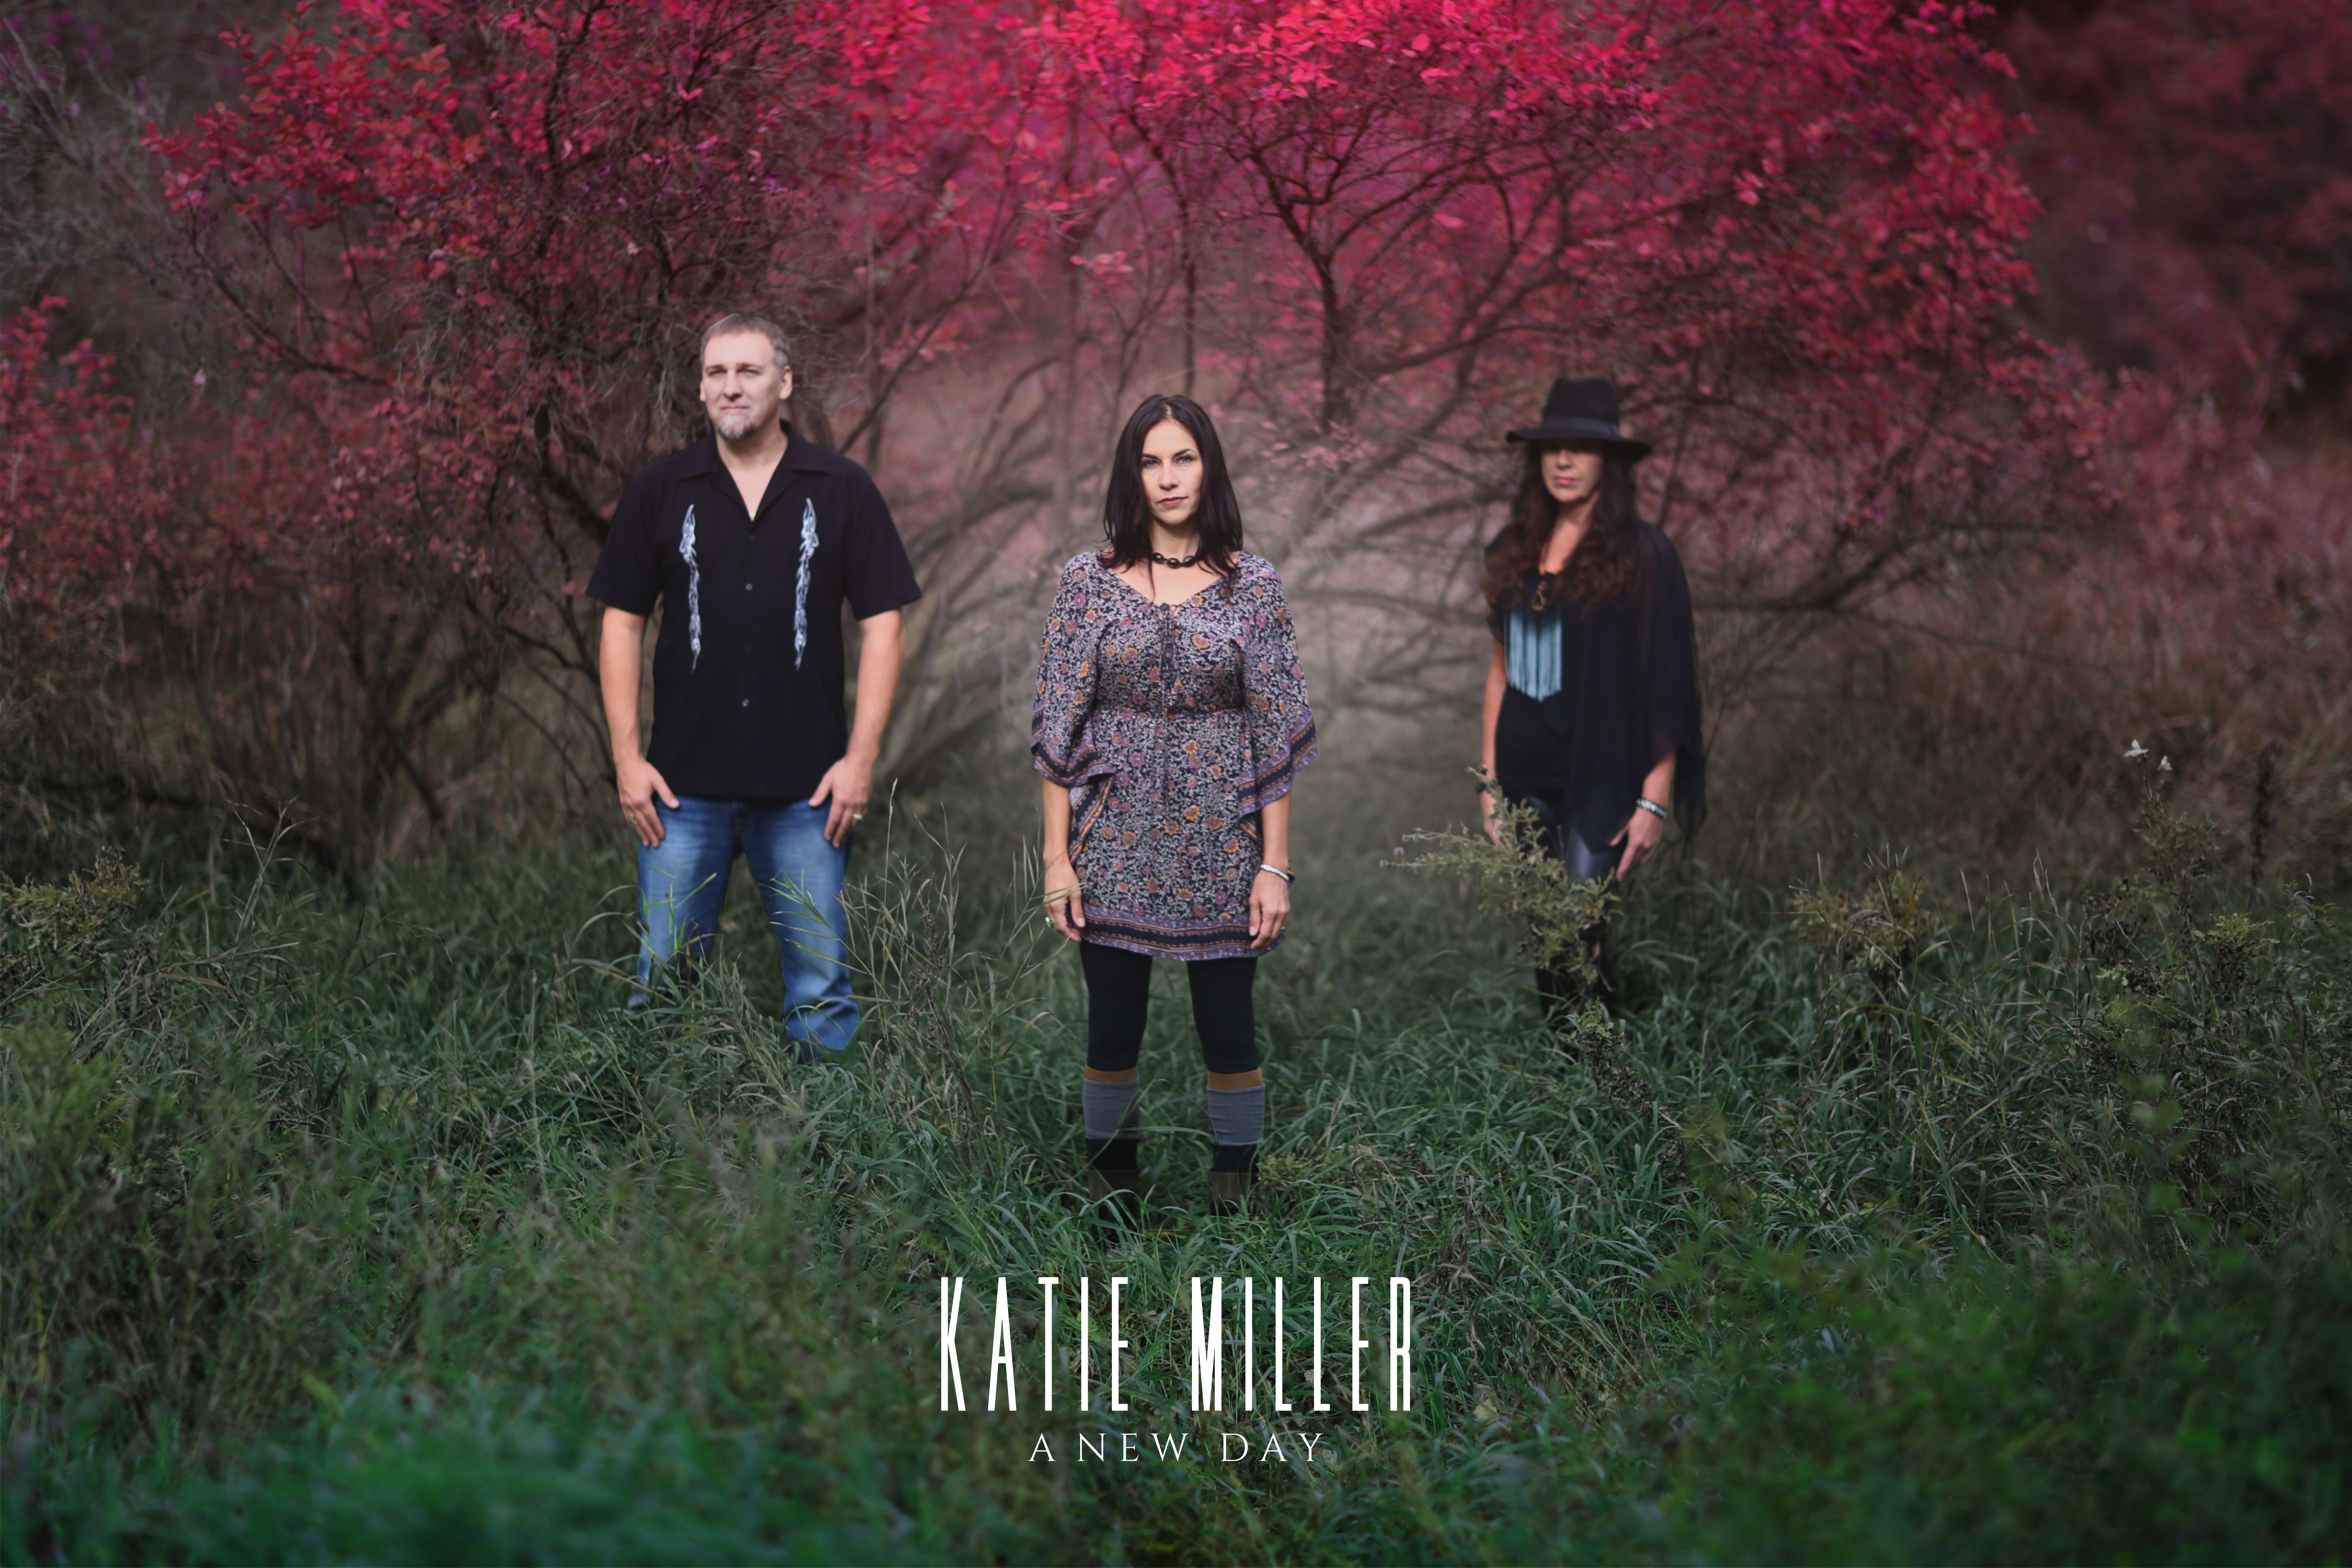 KATIE MILLER - A NEW DAY